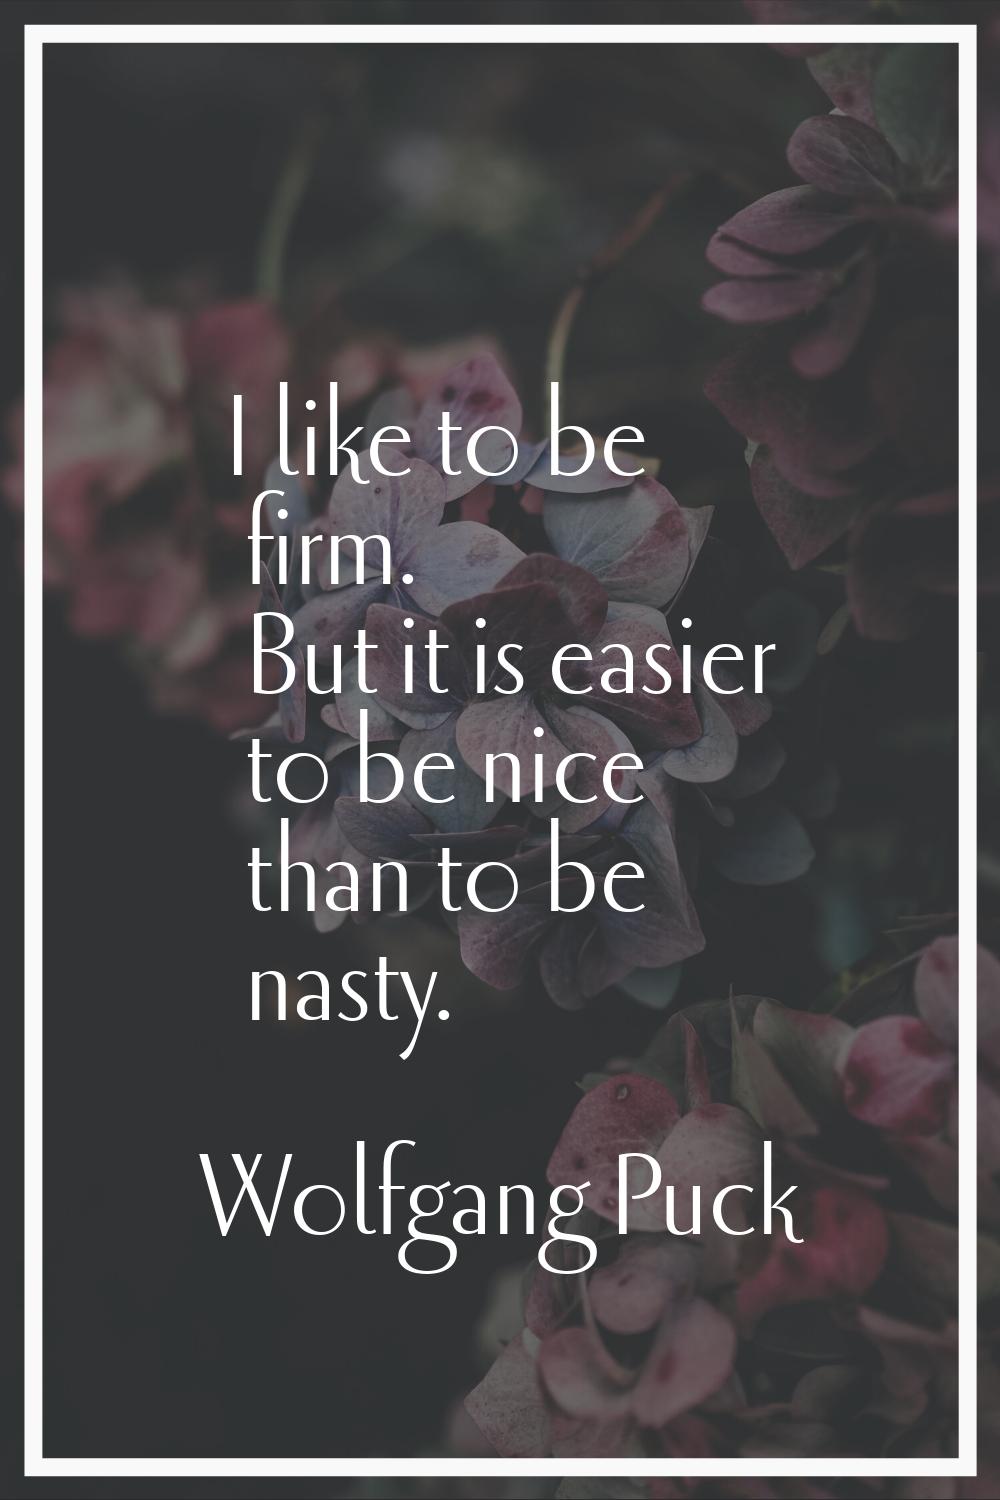 I like to be firm. But it is easier to be nice than to be nasty.